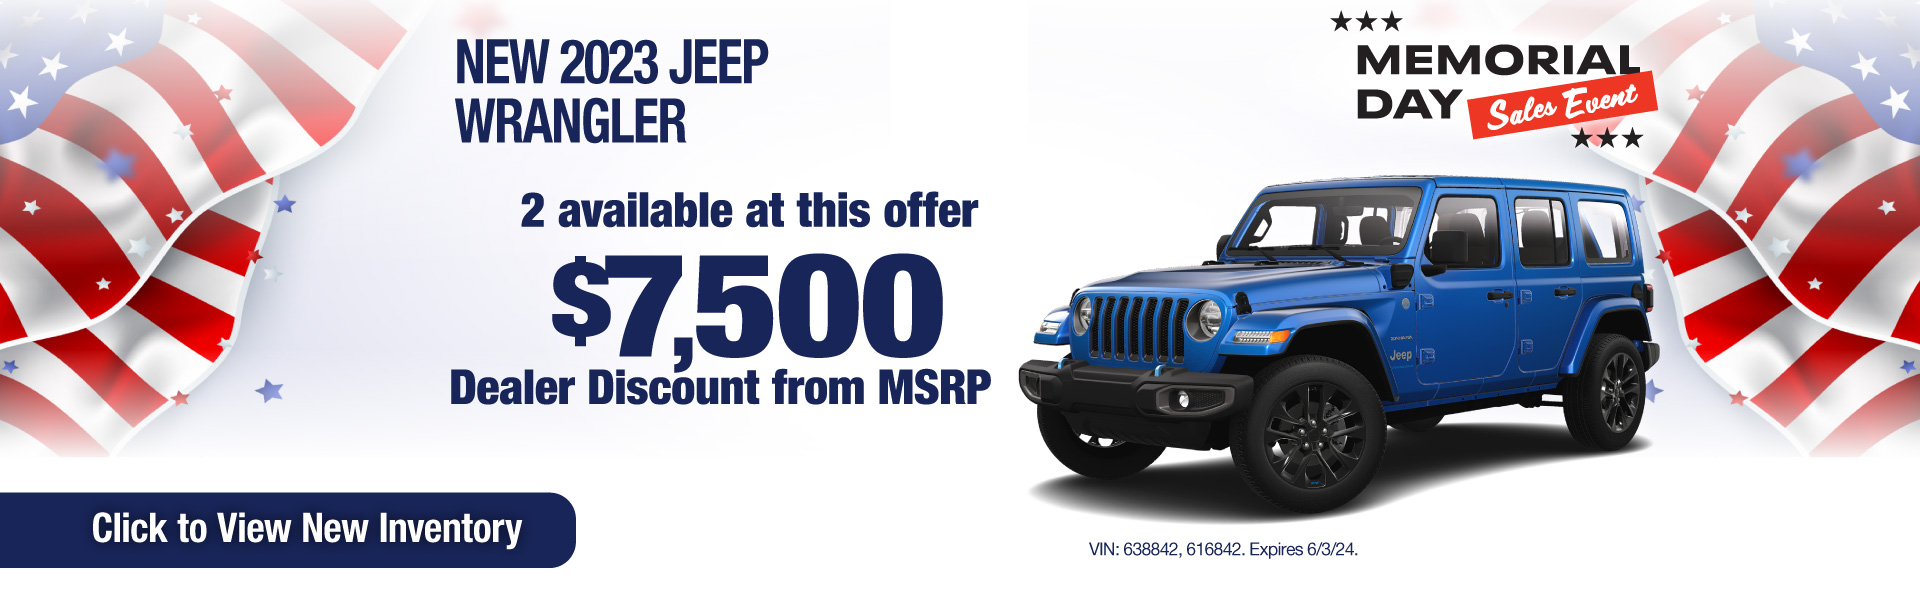 Purchase a New 2023 Jeep Wrangler and get a $7,500 Dealer Discount from MSRP! Offer expires 6/3/24.